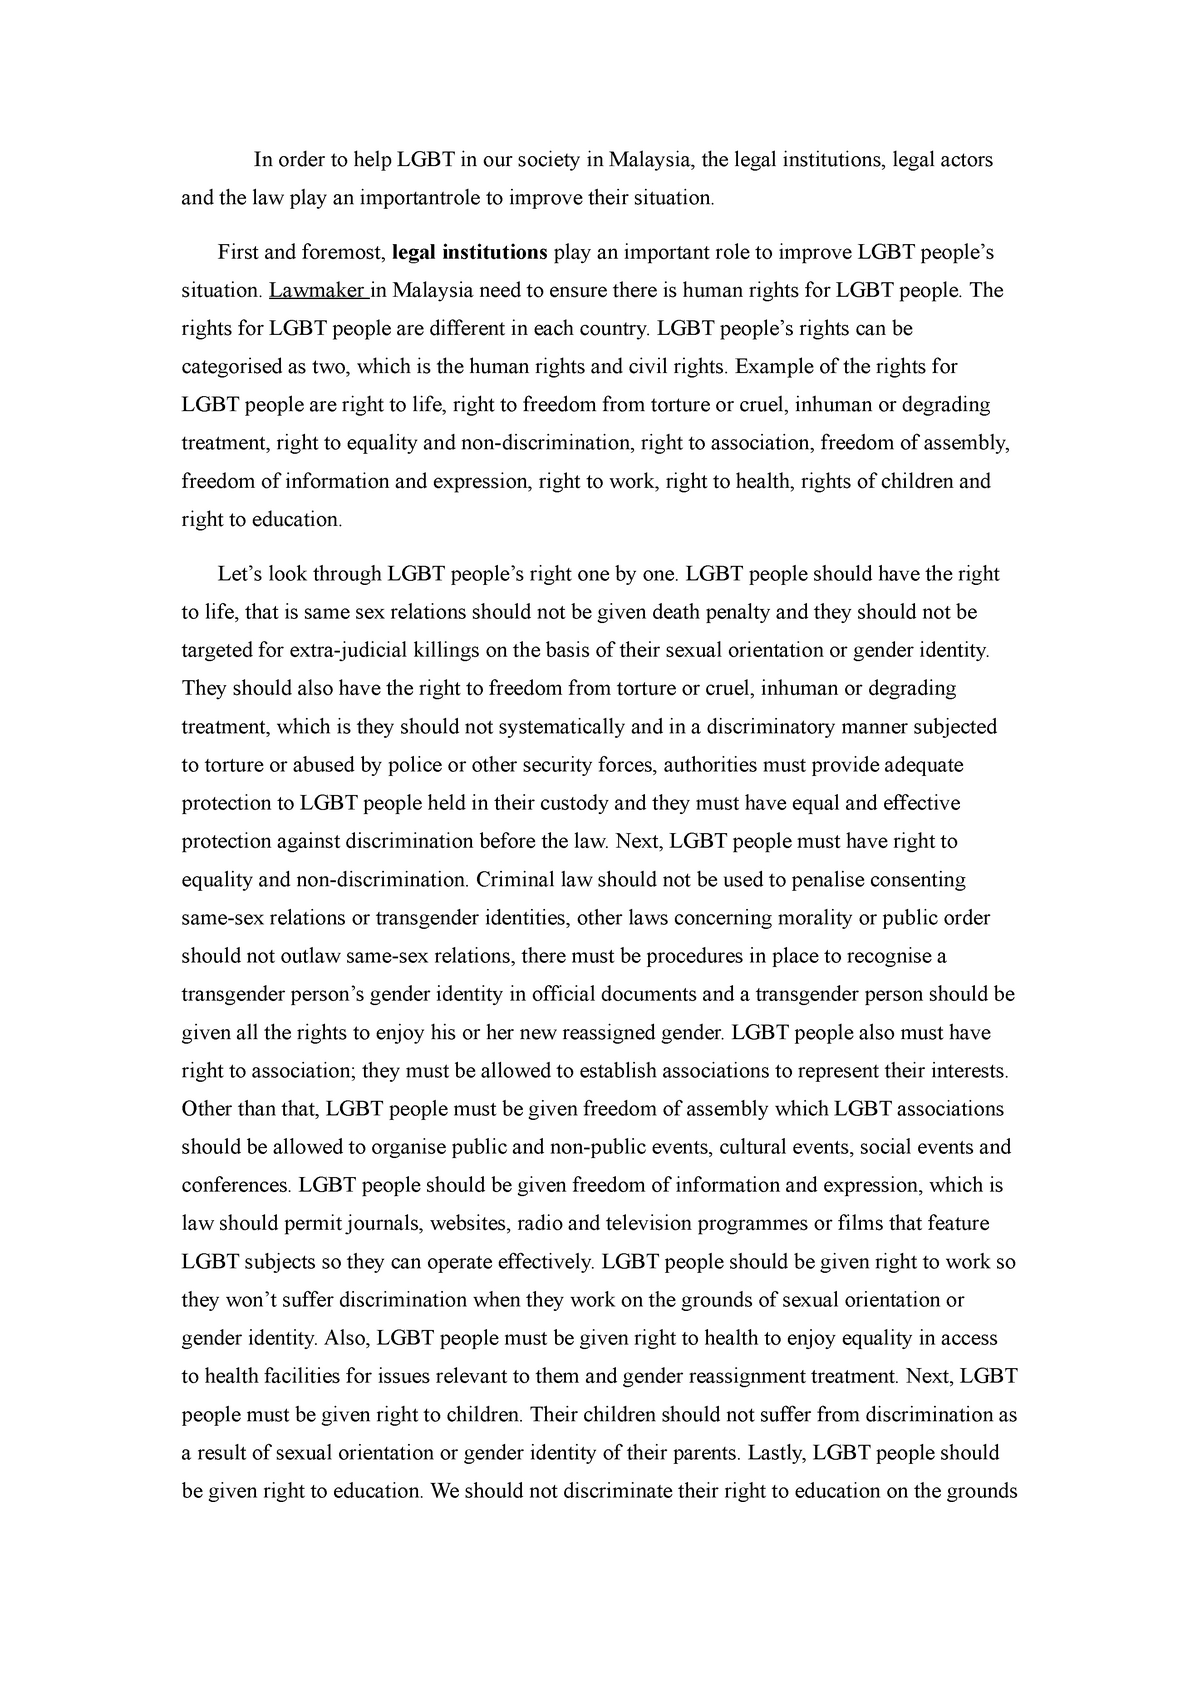 Suggestion LGBT-essay-docx - In order to help LGBT in our society in ...